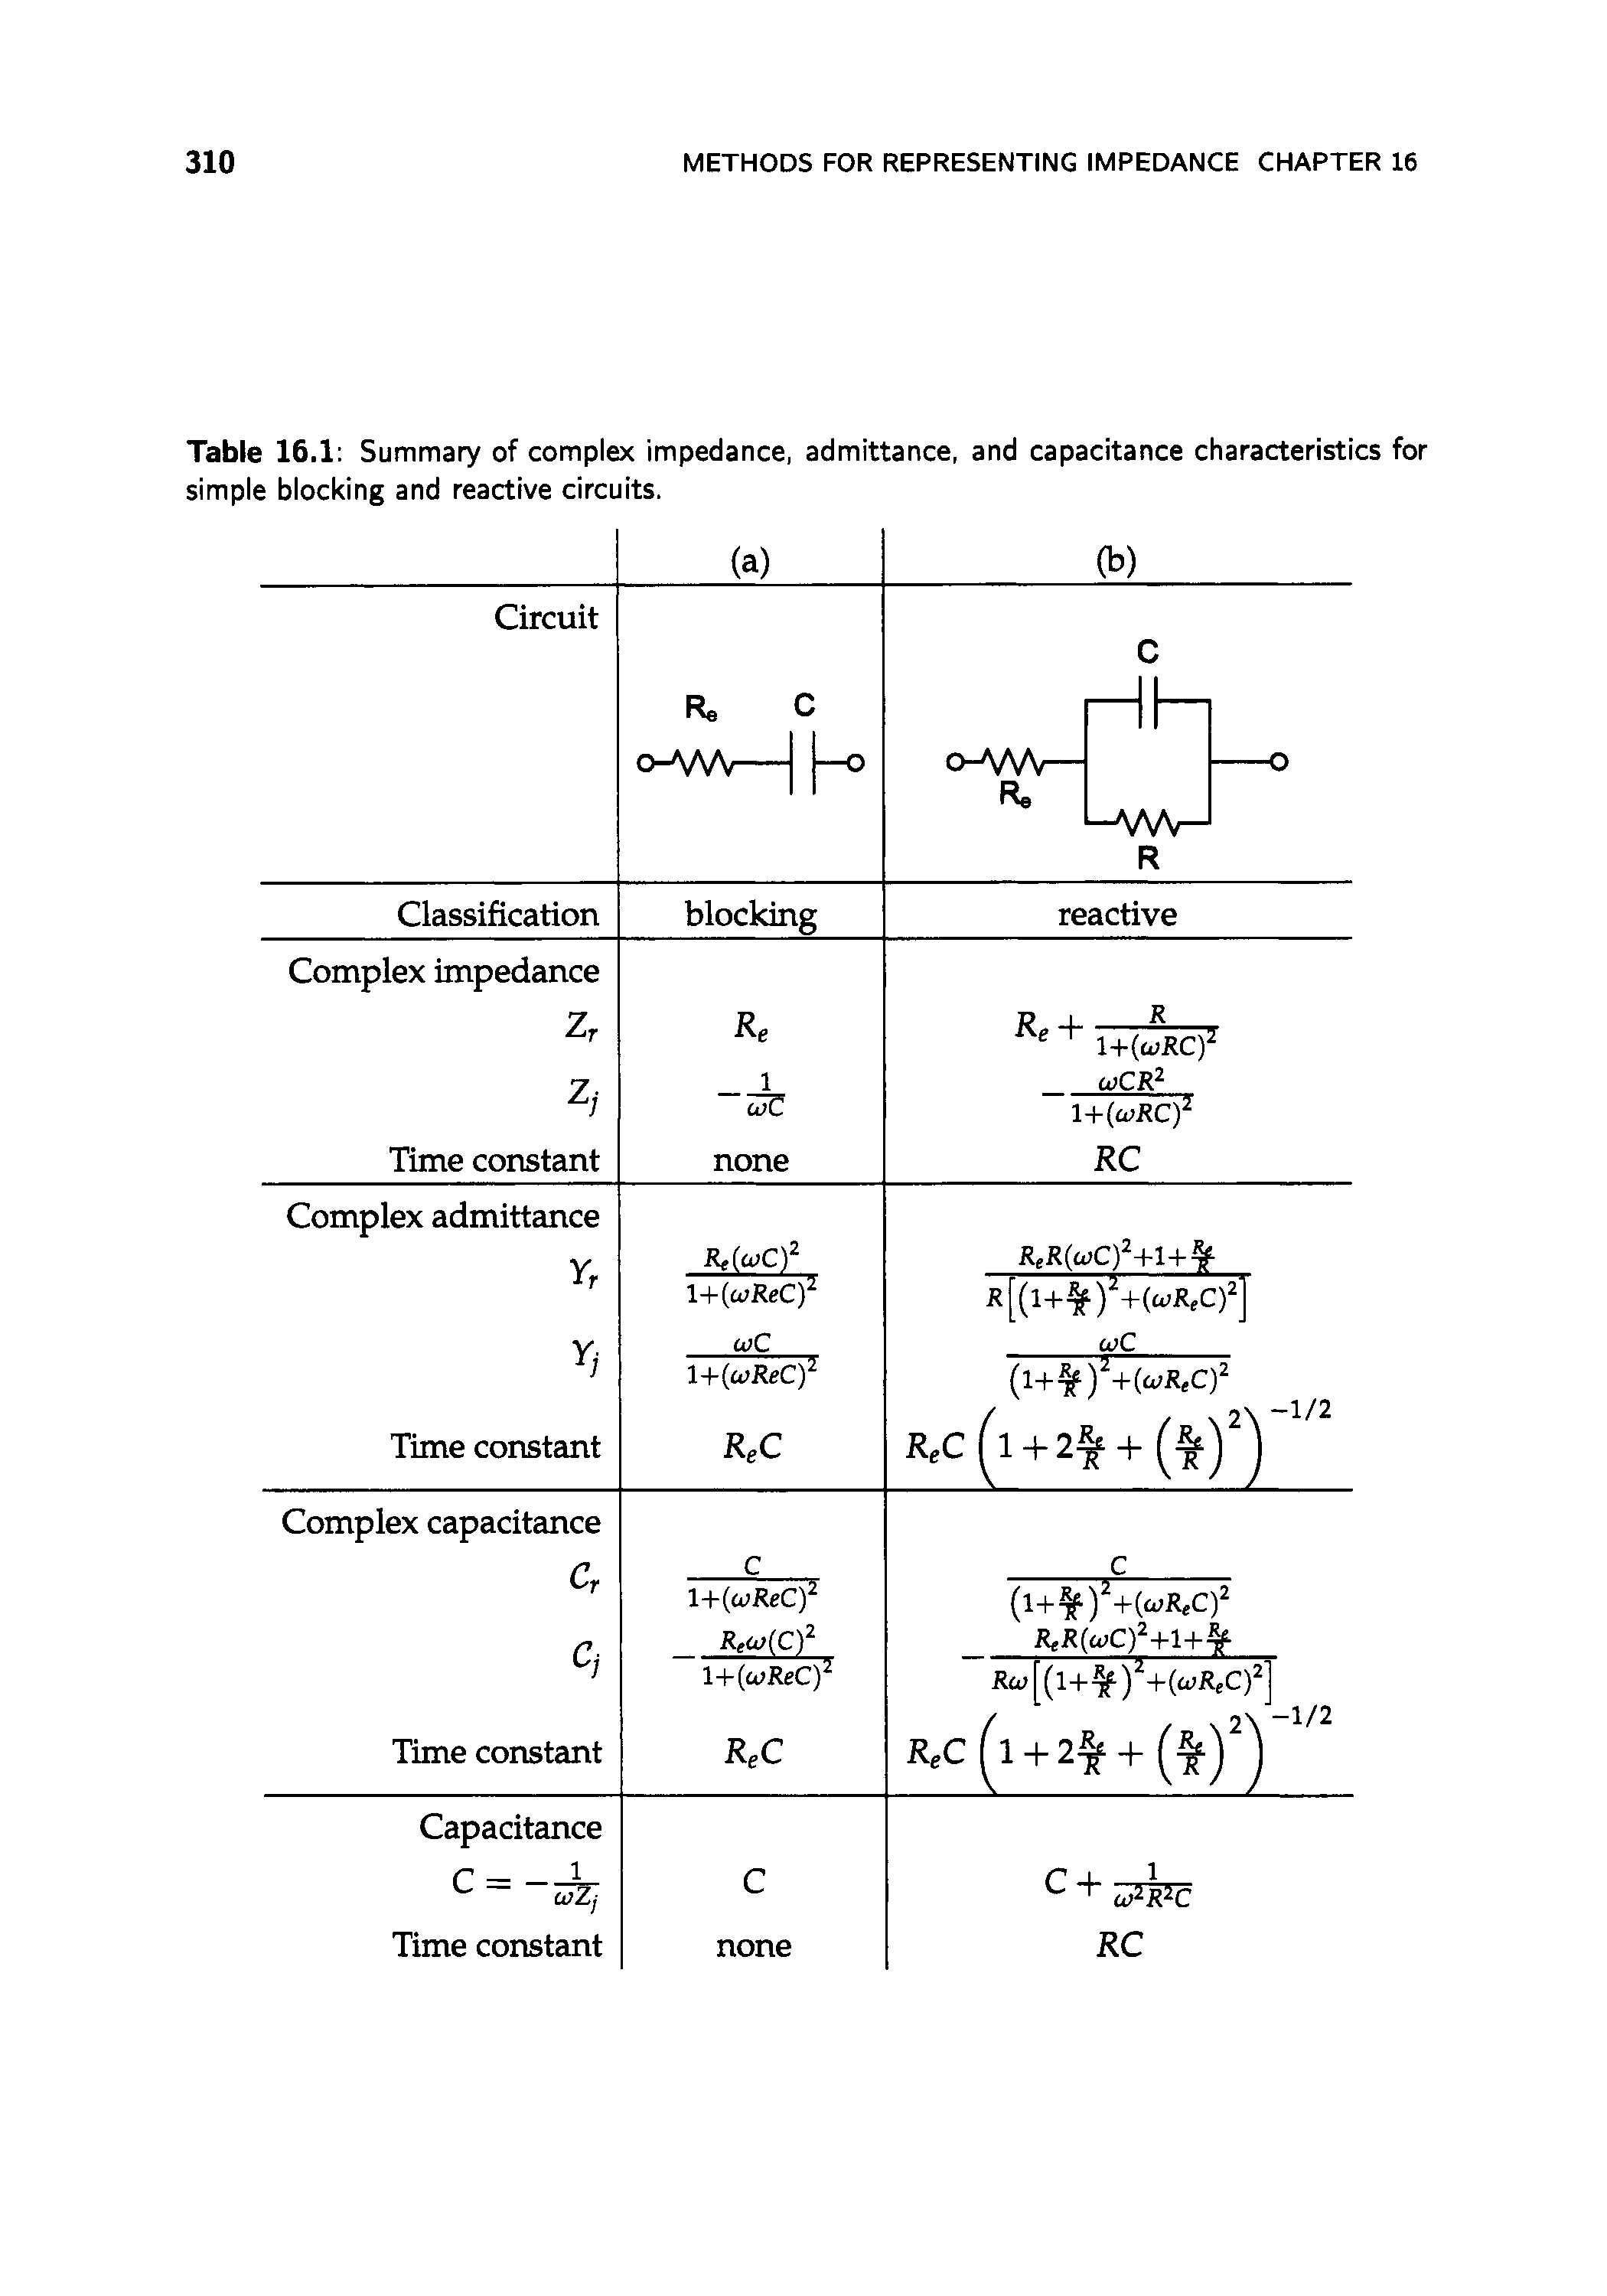 Table 16.1 Summary of complex impedance, admittance, and capacitance characteristics for simple blocking and reactive circuits.